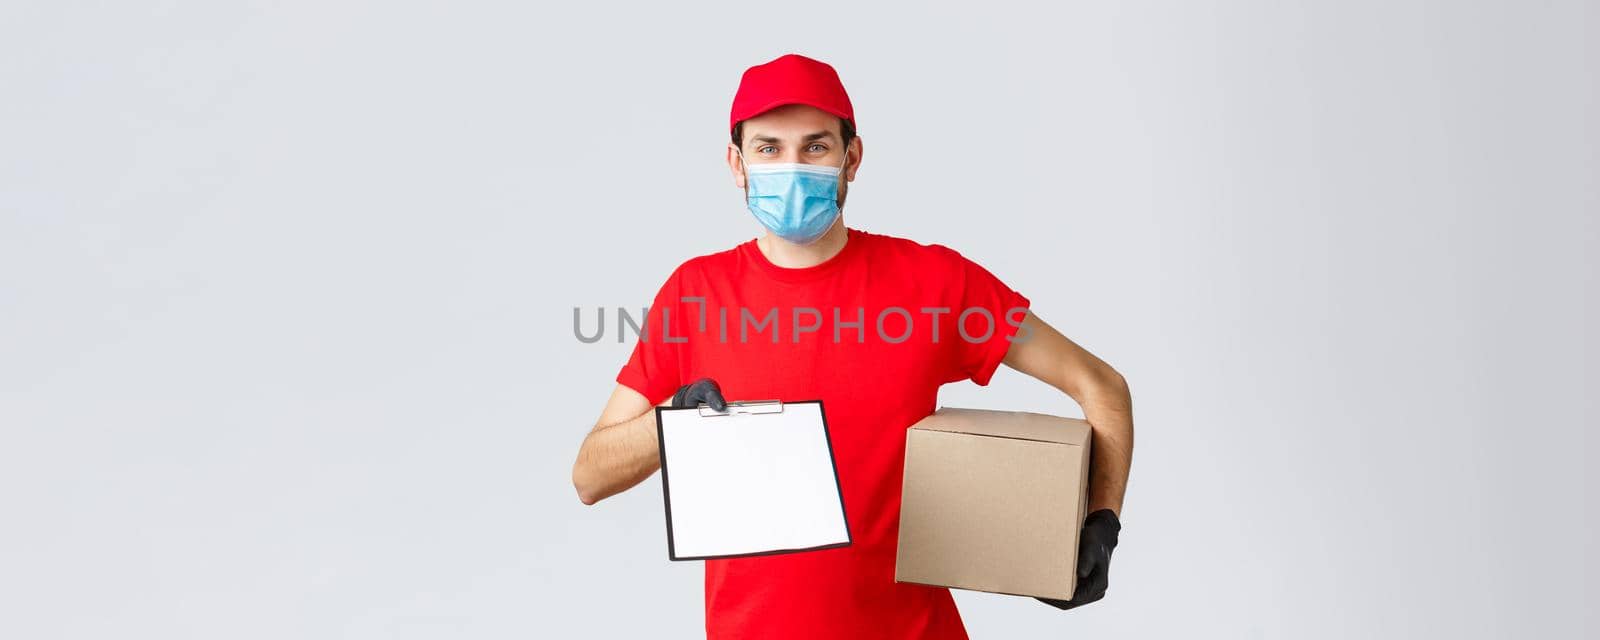 Packages and parcels delivery, covid-19 quarantine delivery, transfer orders. Friendly courier in red uniform, face mask and gloves, holding package box and give clipboard order sign form to client.